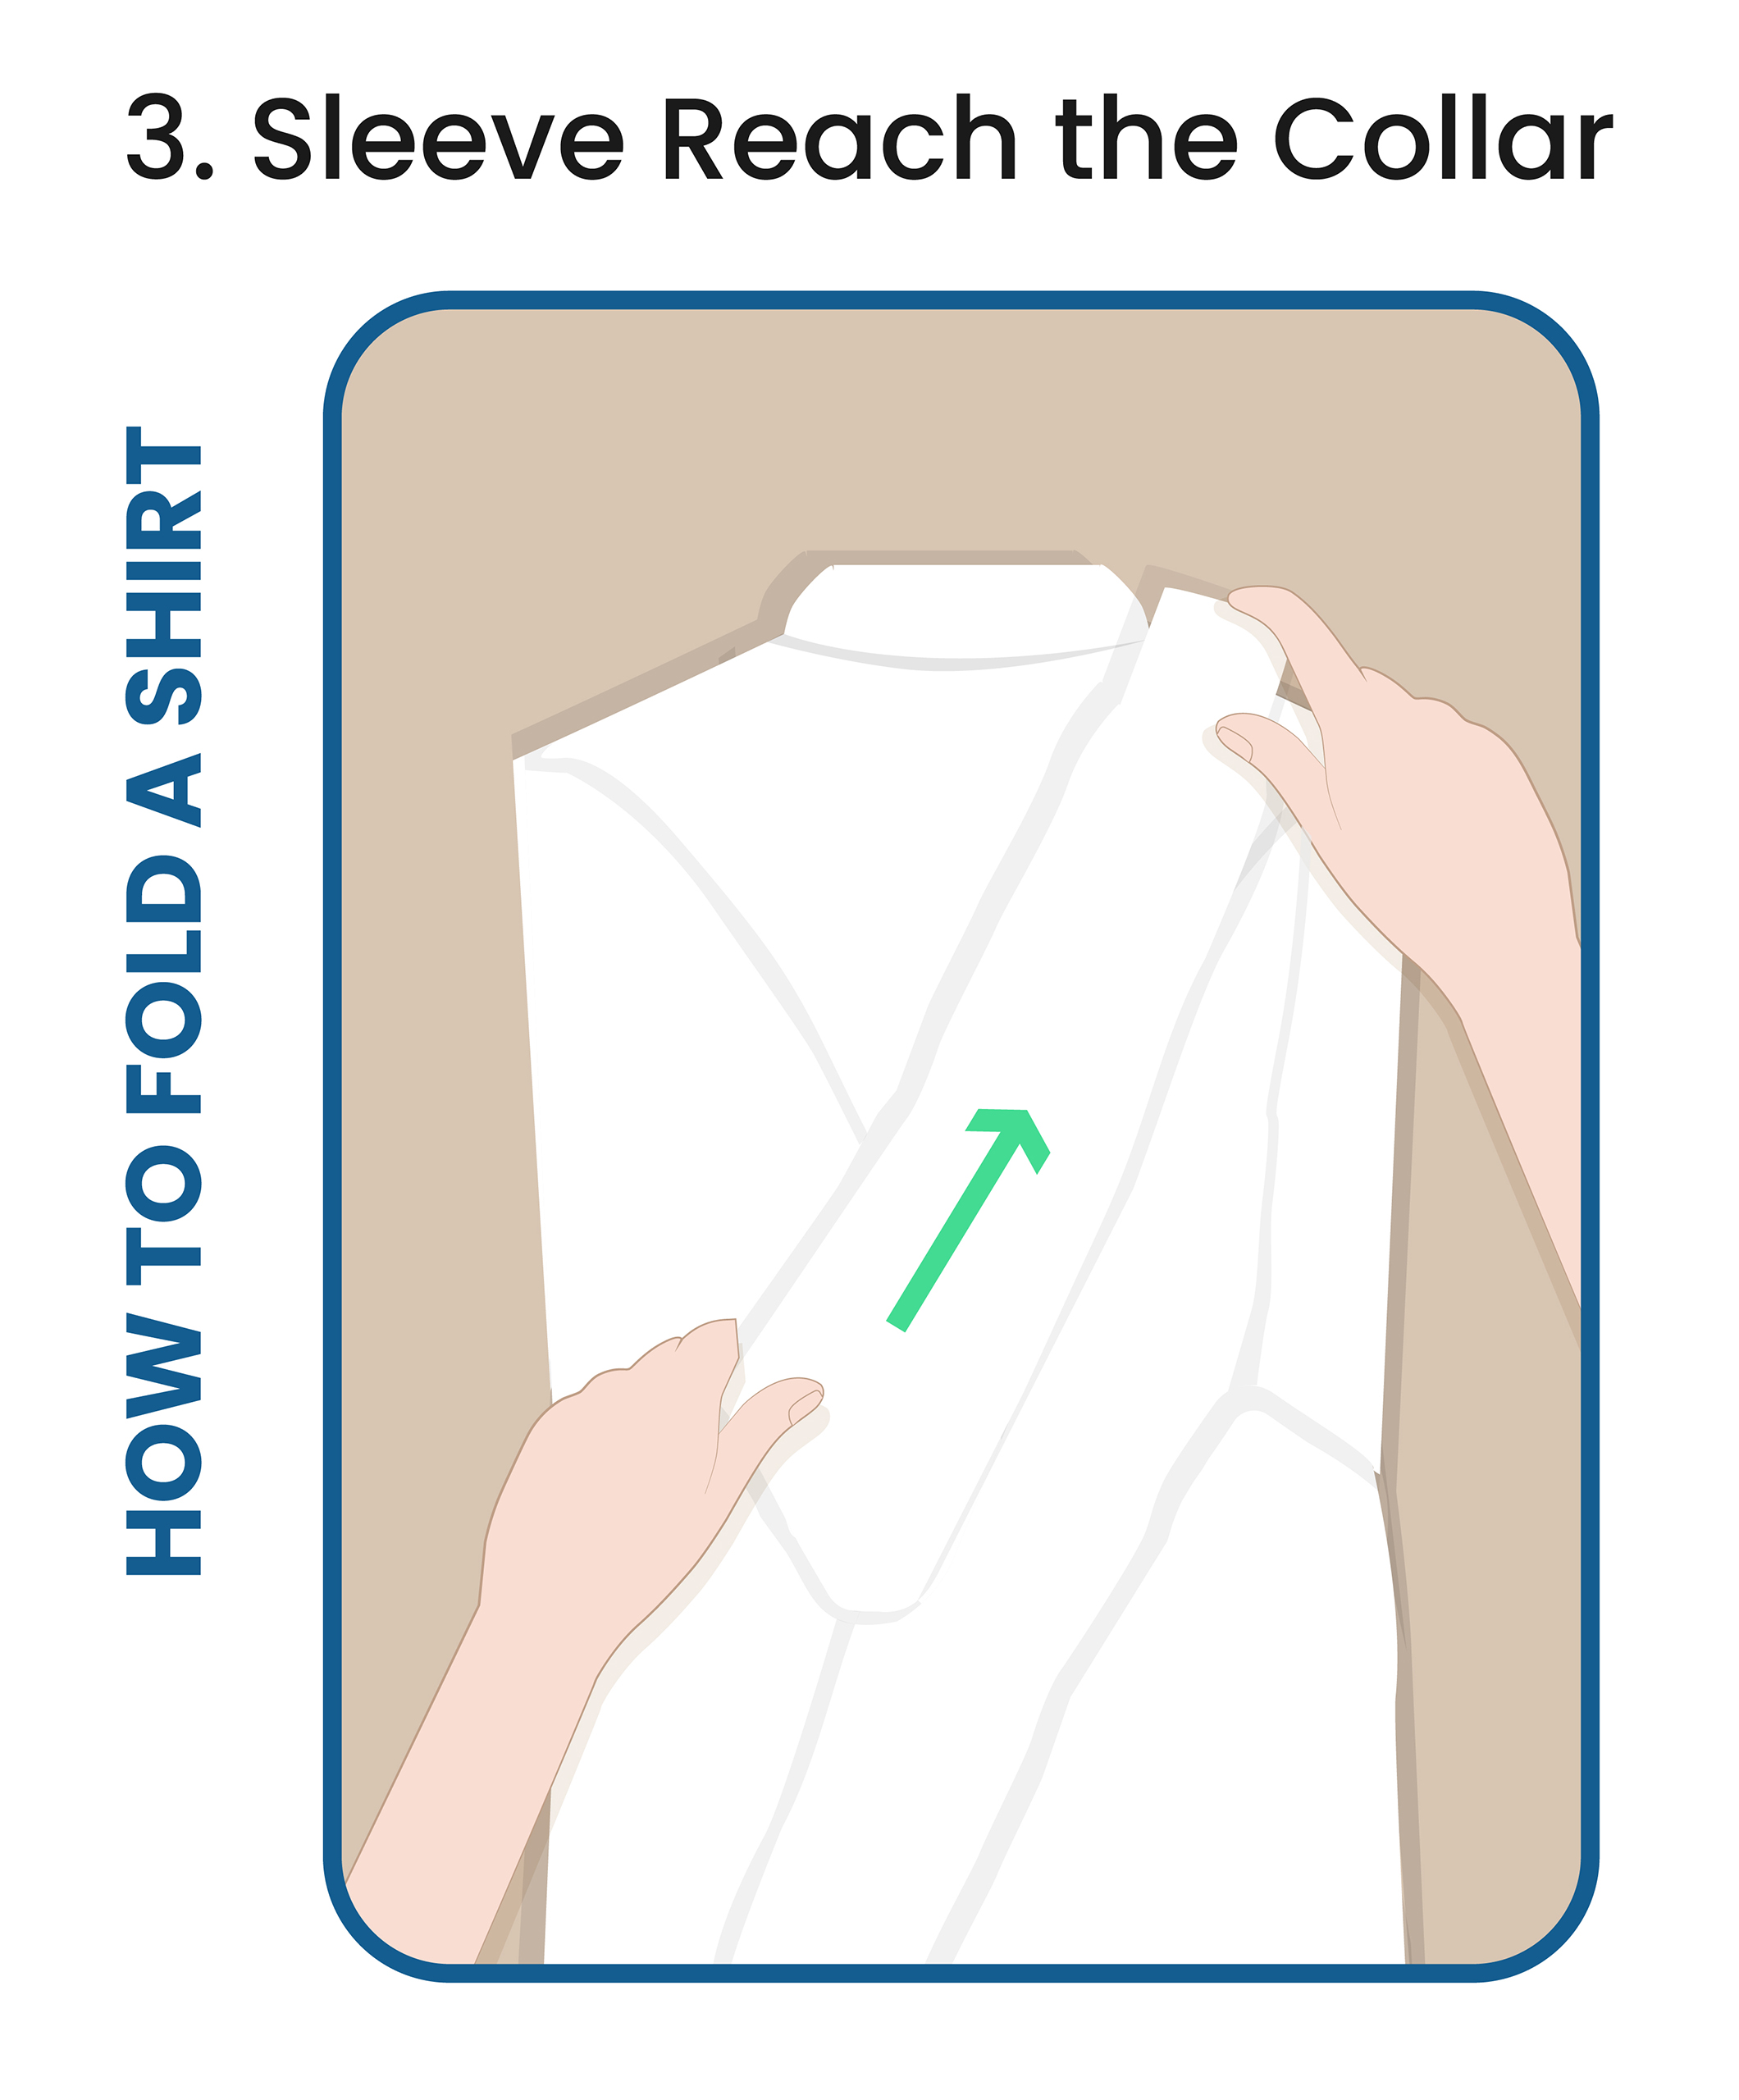 folded sleeves should reach the collar